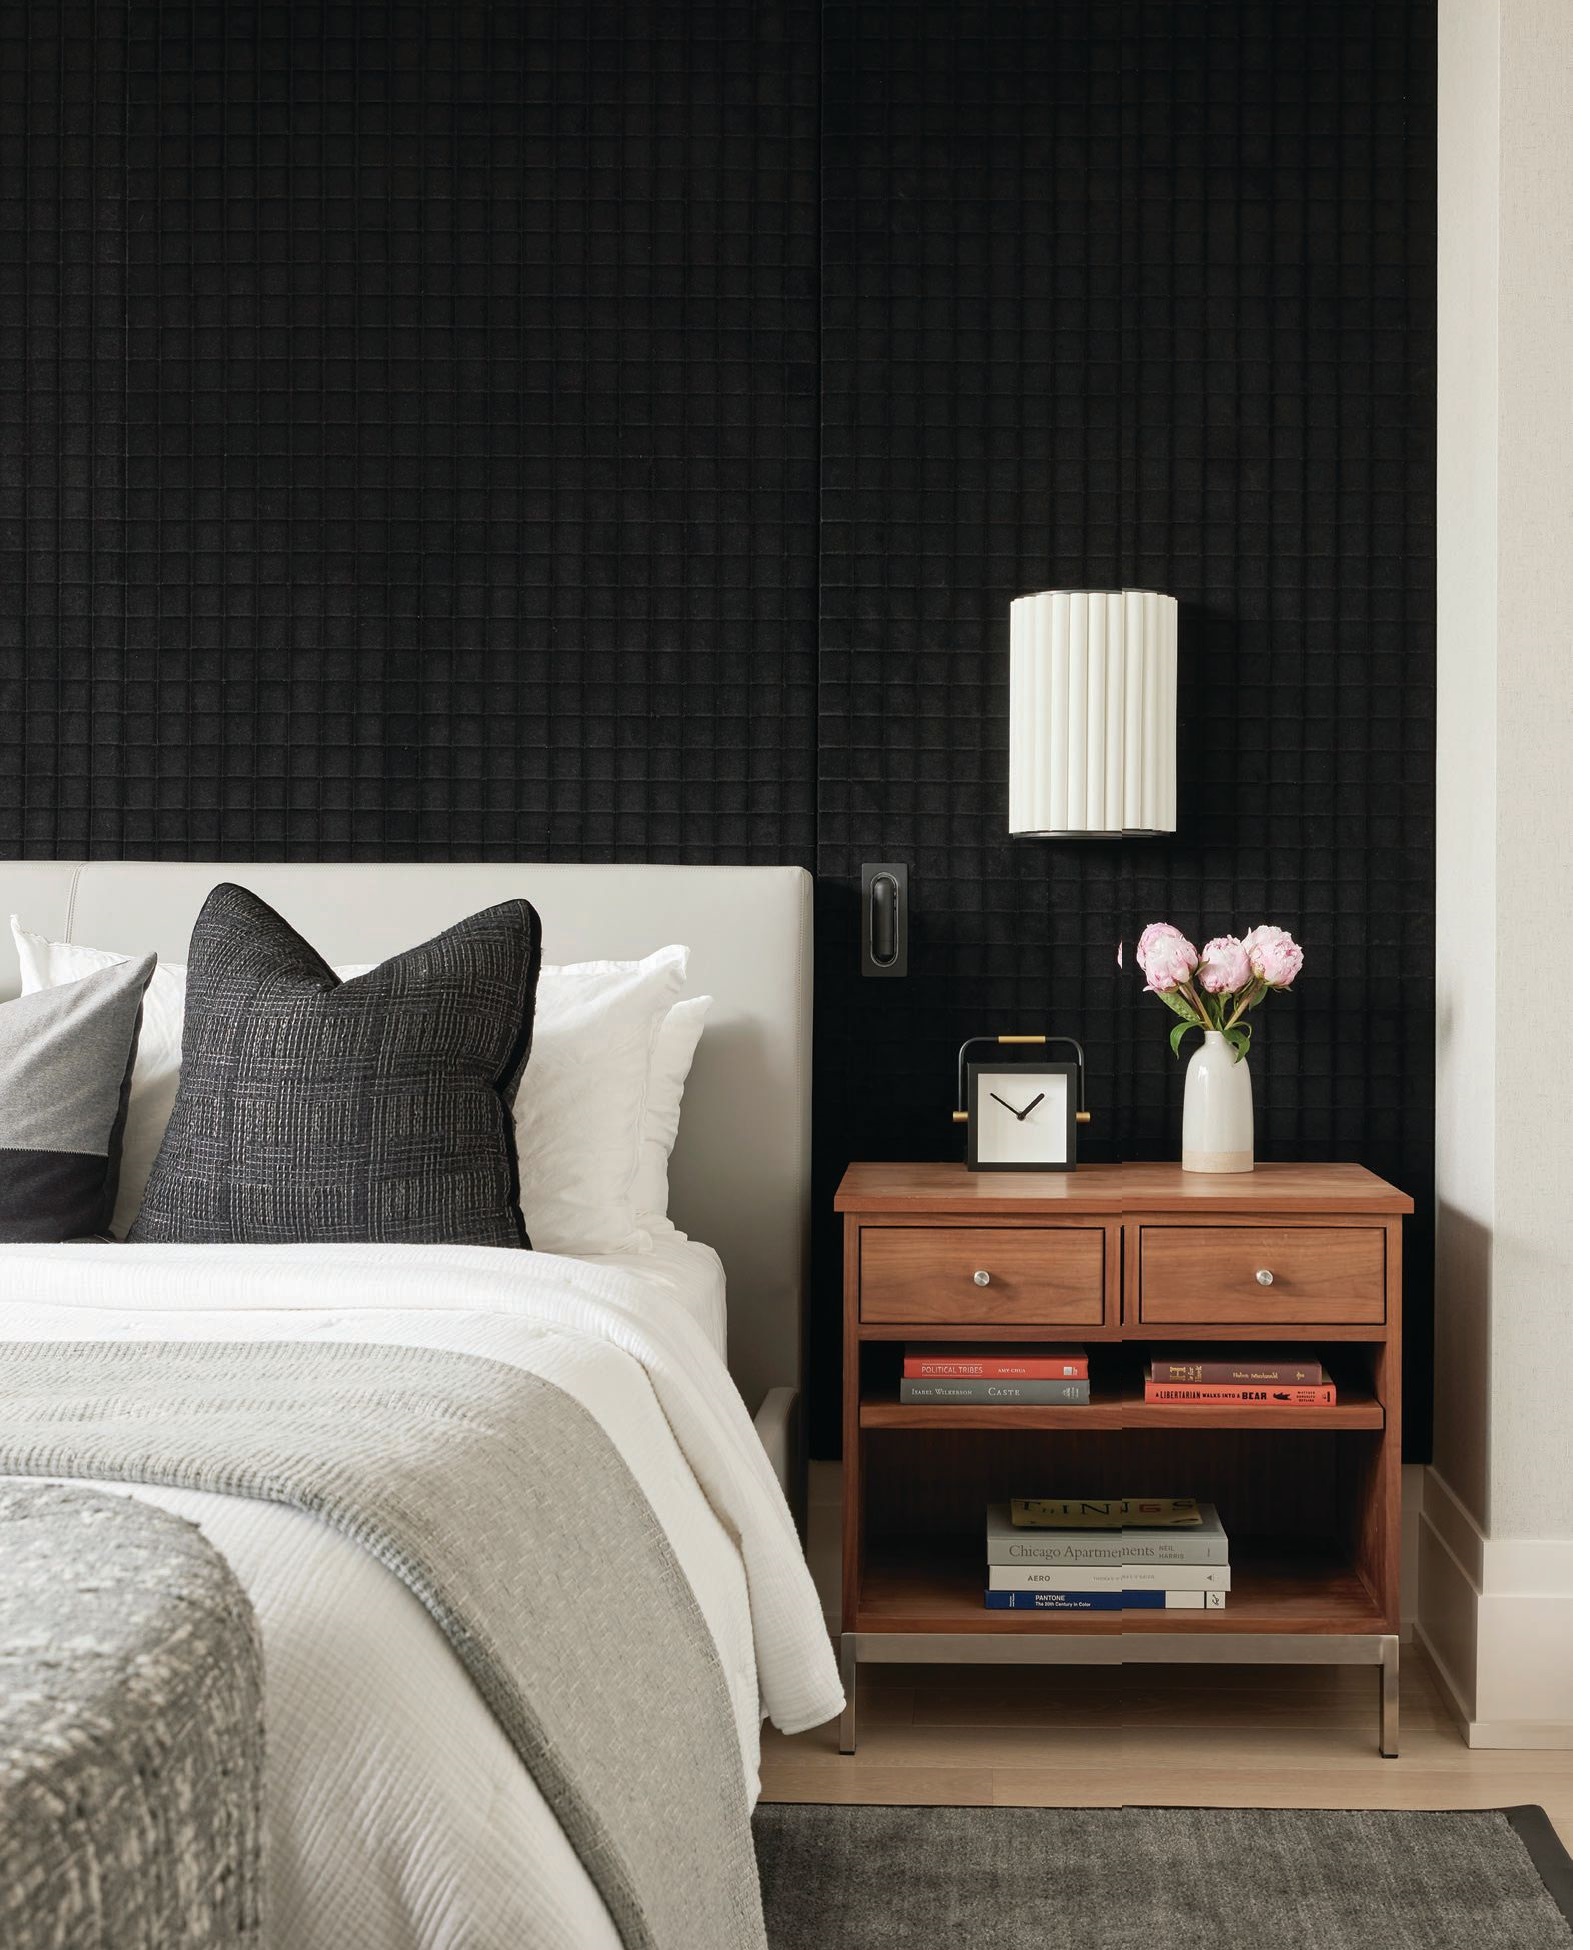 The primary bedroom is a stunner thanks to a coal-colored wall upholstered in Pollack’s Embellushed Plush Photographed by Mike Schwartz